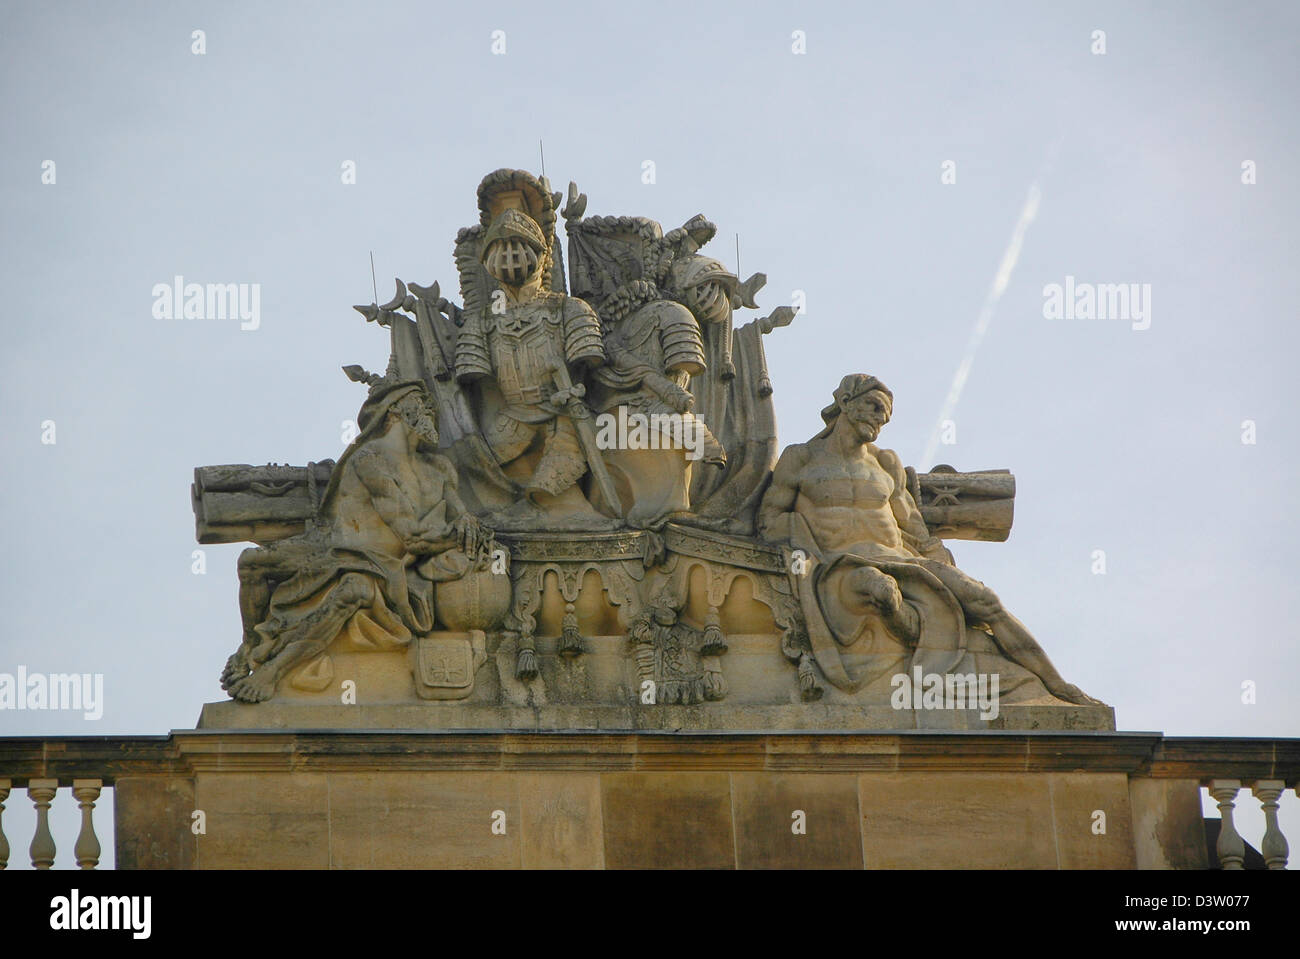 Details of the Alte Nationalgalerie, (Old National Gallery) Berlin, Germany Stock Photo